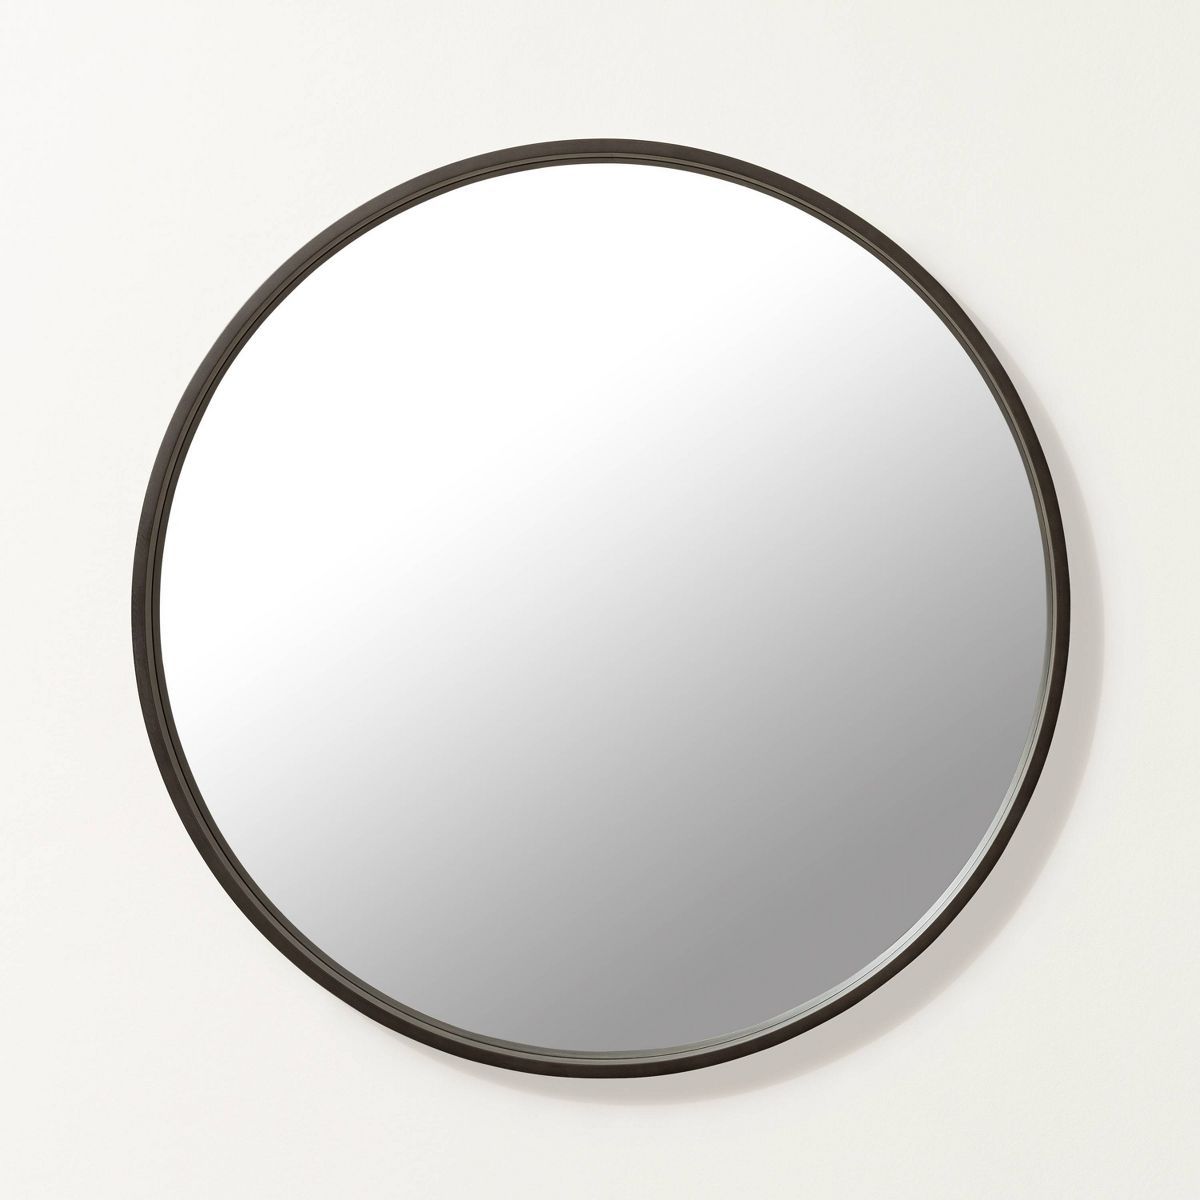 Round Wood Framed Wall Mirror - Hearth & Hand™ with Magnolia | Target